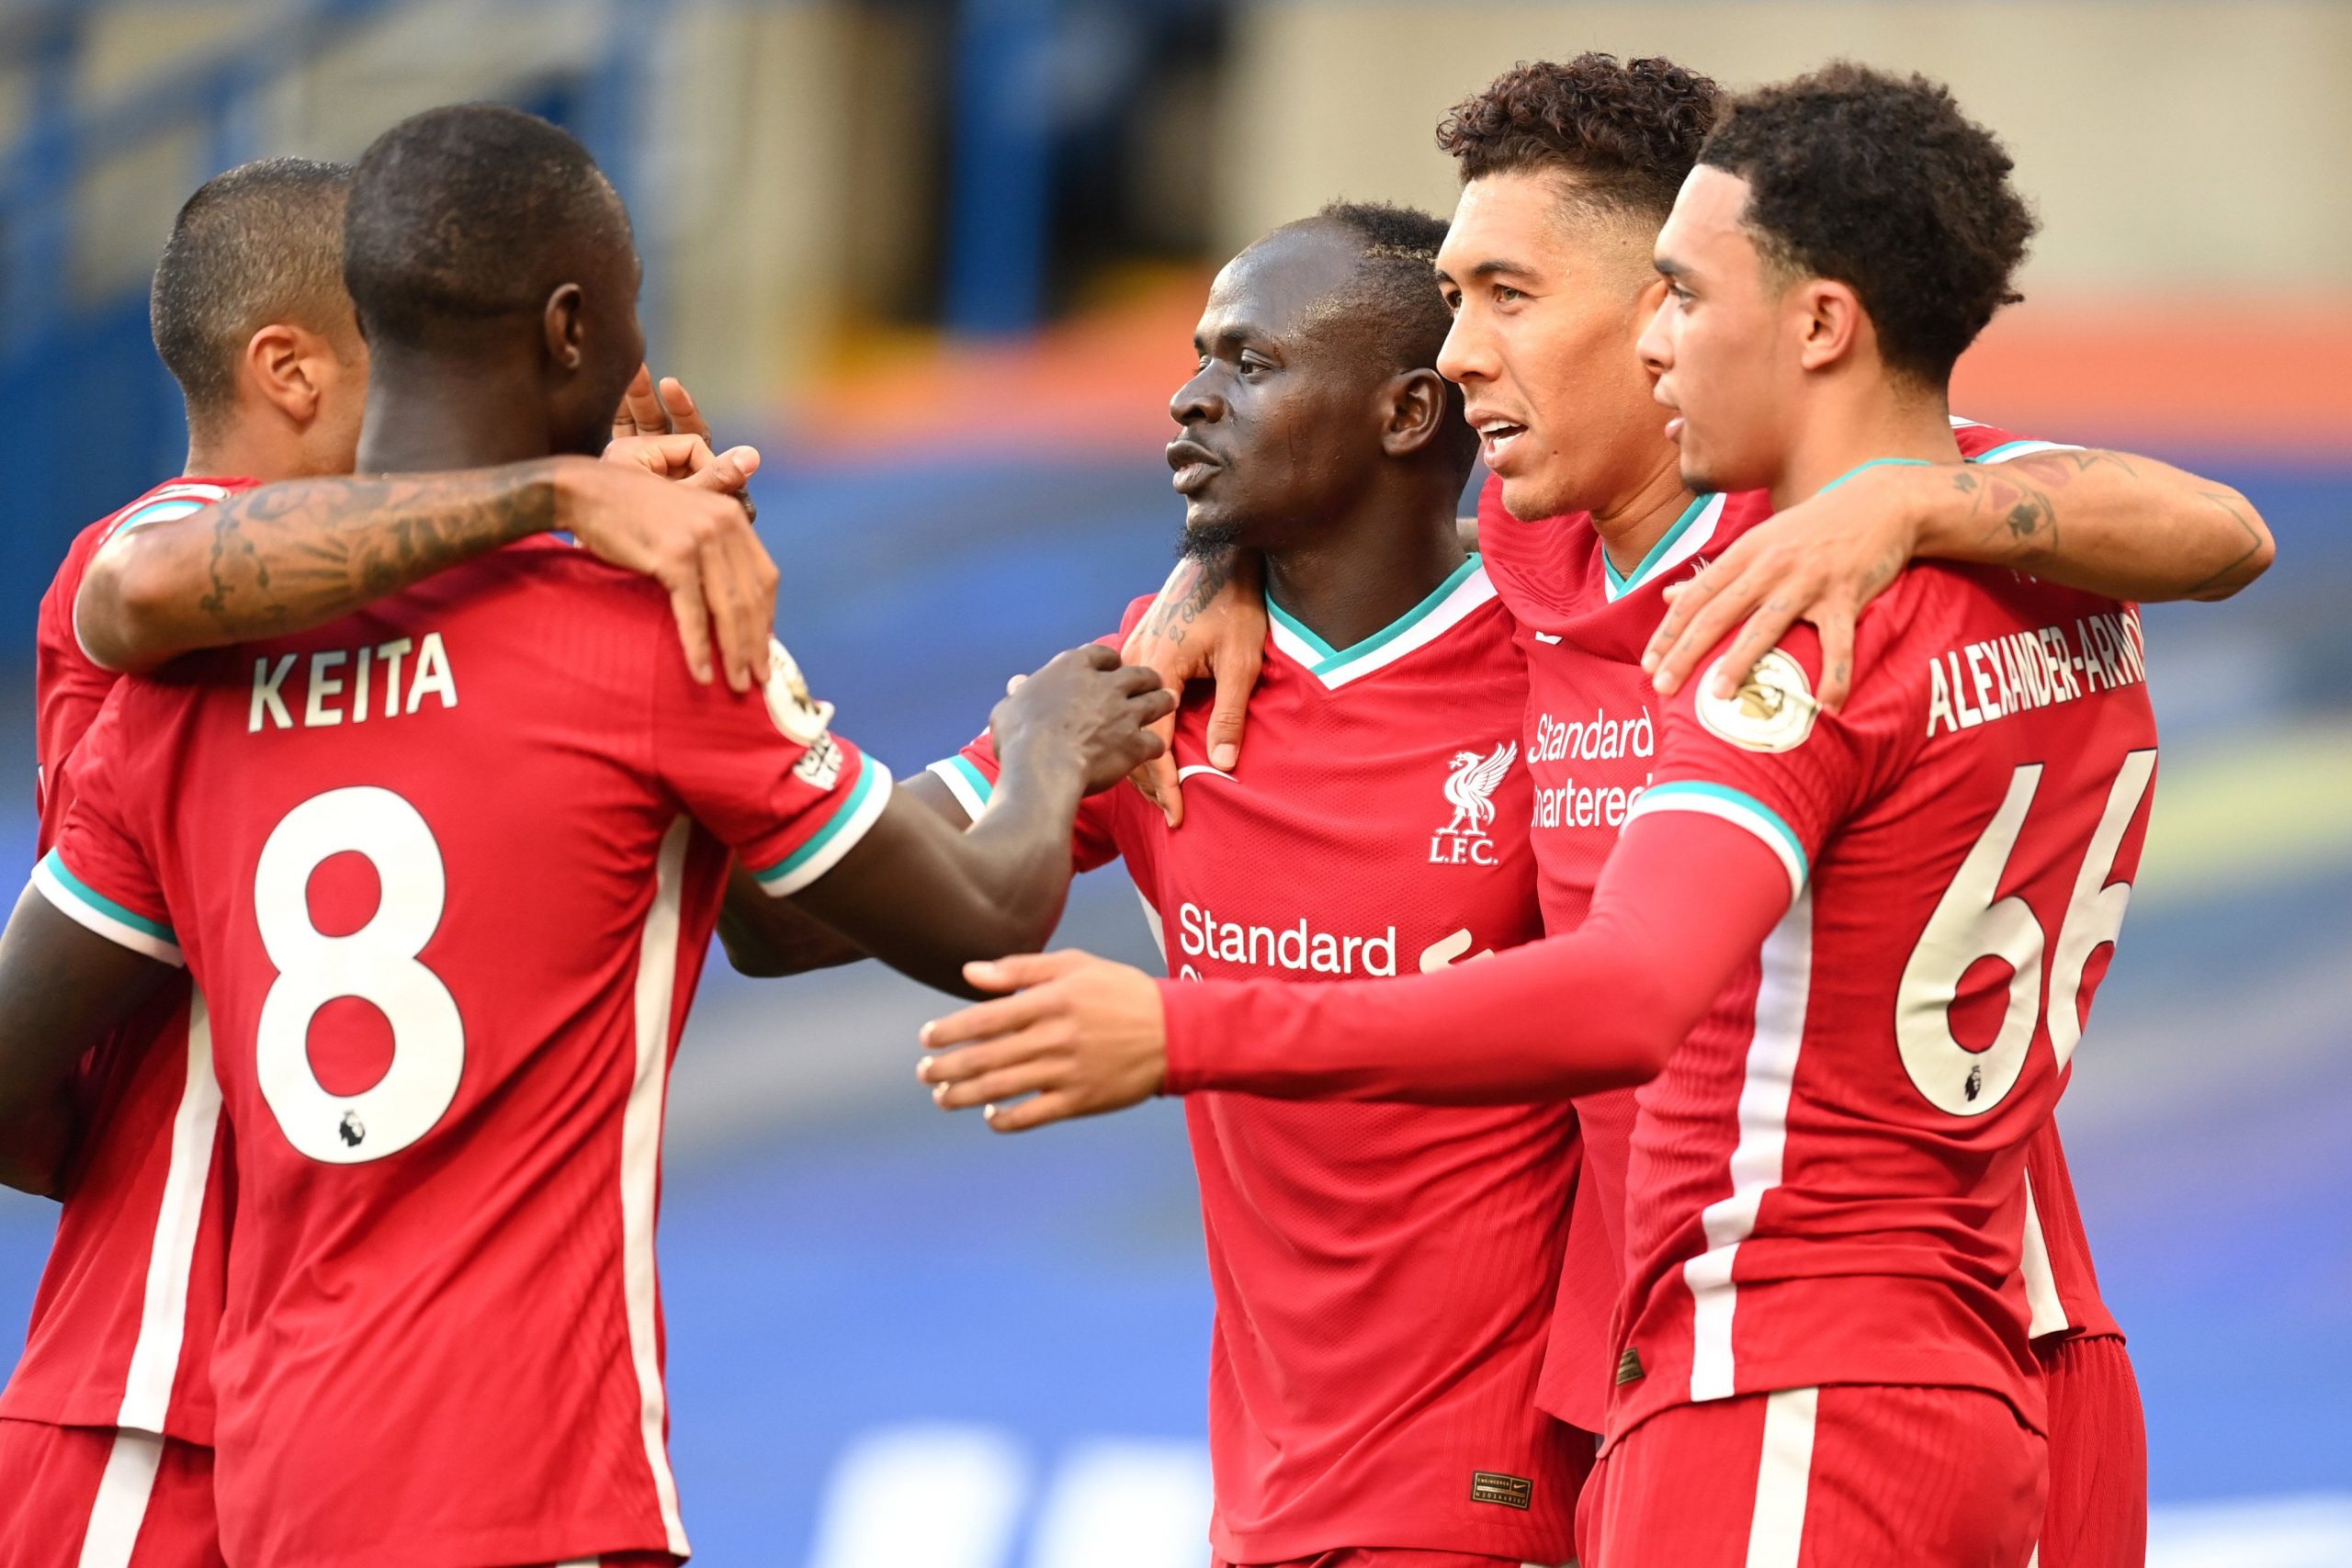 Liverpool’s Sadio Mane sinks 10-man Chelsea, Son Heung-min hits four in Tottenham Hotspur rout